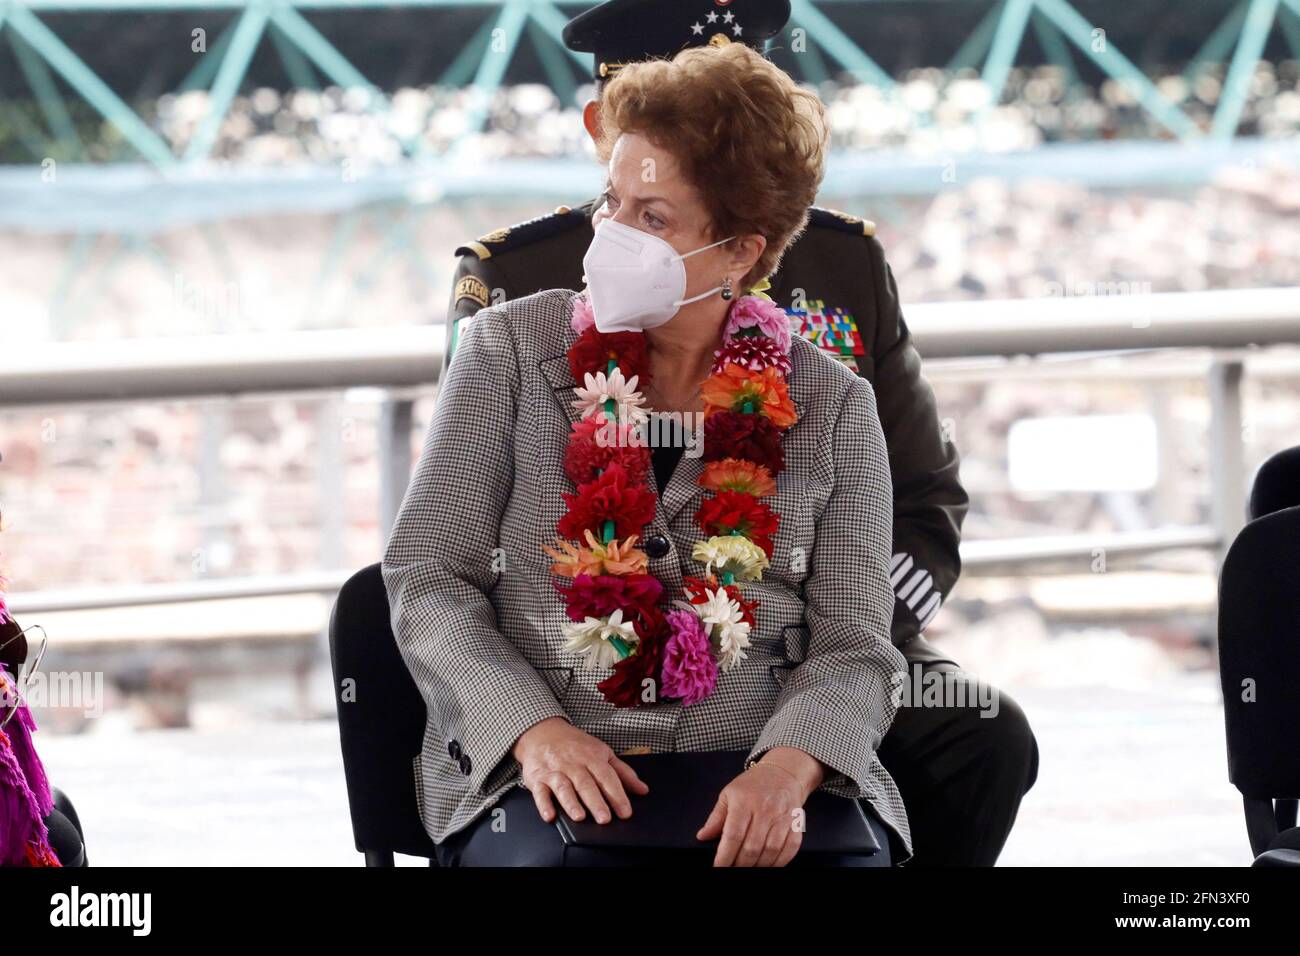 Mexico City, Mexico. 13th May, 2021. Former president of Brazil, Dilma Rousseff, during ceremony for the 700 years of the founding of Tenochtitlan at the Museo del Templo Mayor on May 13, 2021 in Mexico City, Mexico. Photo by Luis Barron/Eyepix/ABACAPRESS.COM Credit: Abaca Press/Alamy Live News Stock Photo